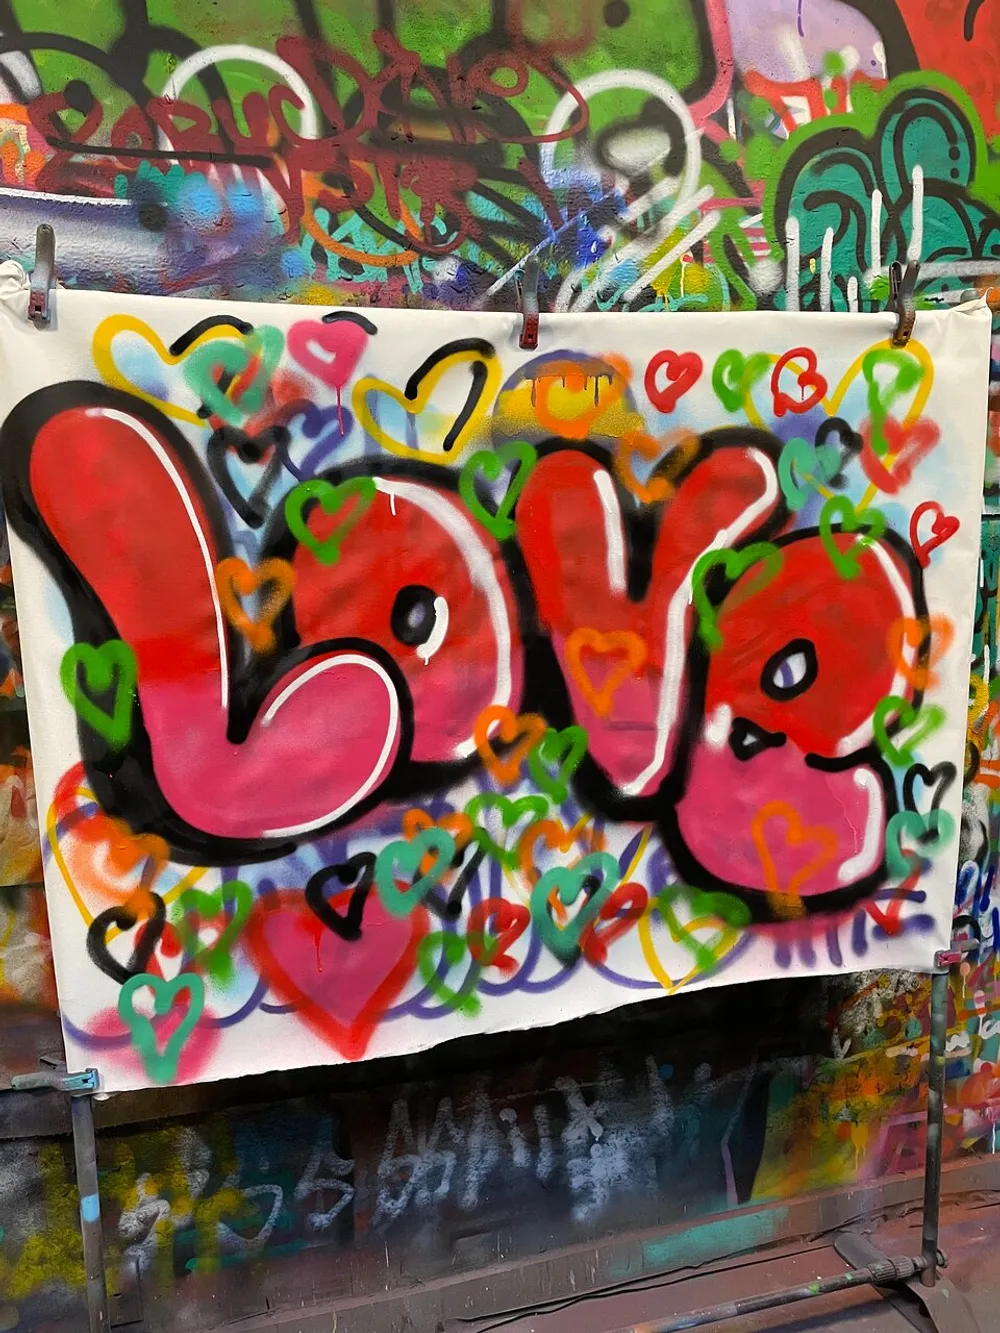 The image features a vibrant graffiti-style artwork with the word Love in bold letters surrounded by multicolored hearts displayed against a backdrop of various other graffiti